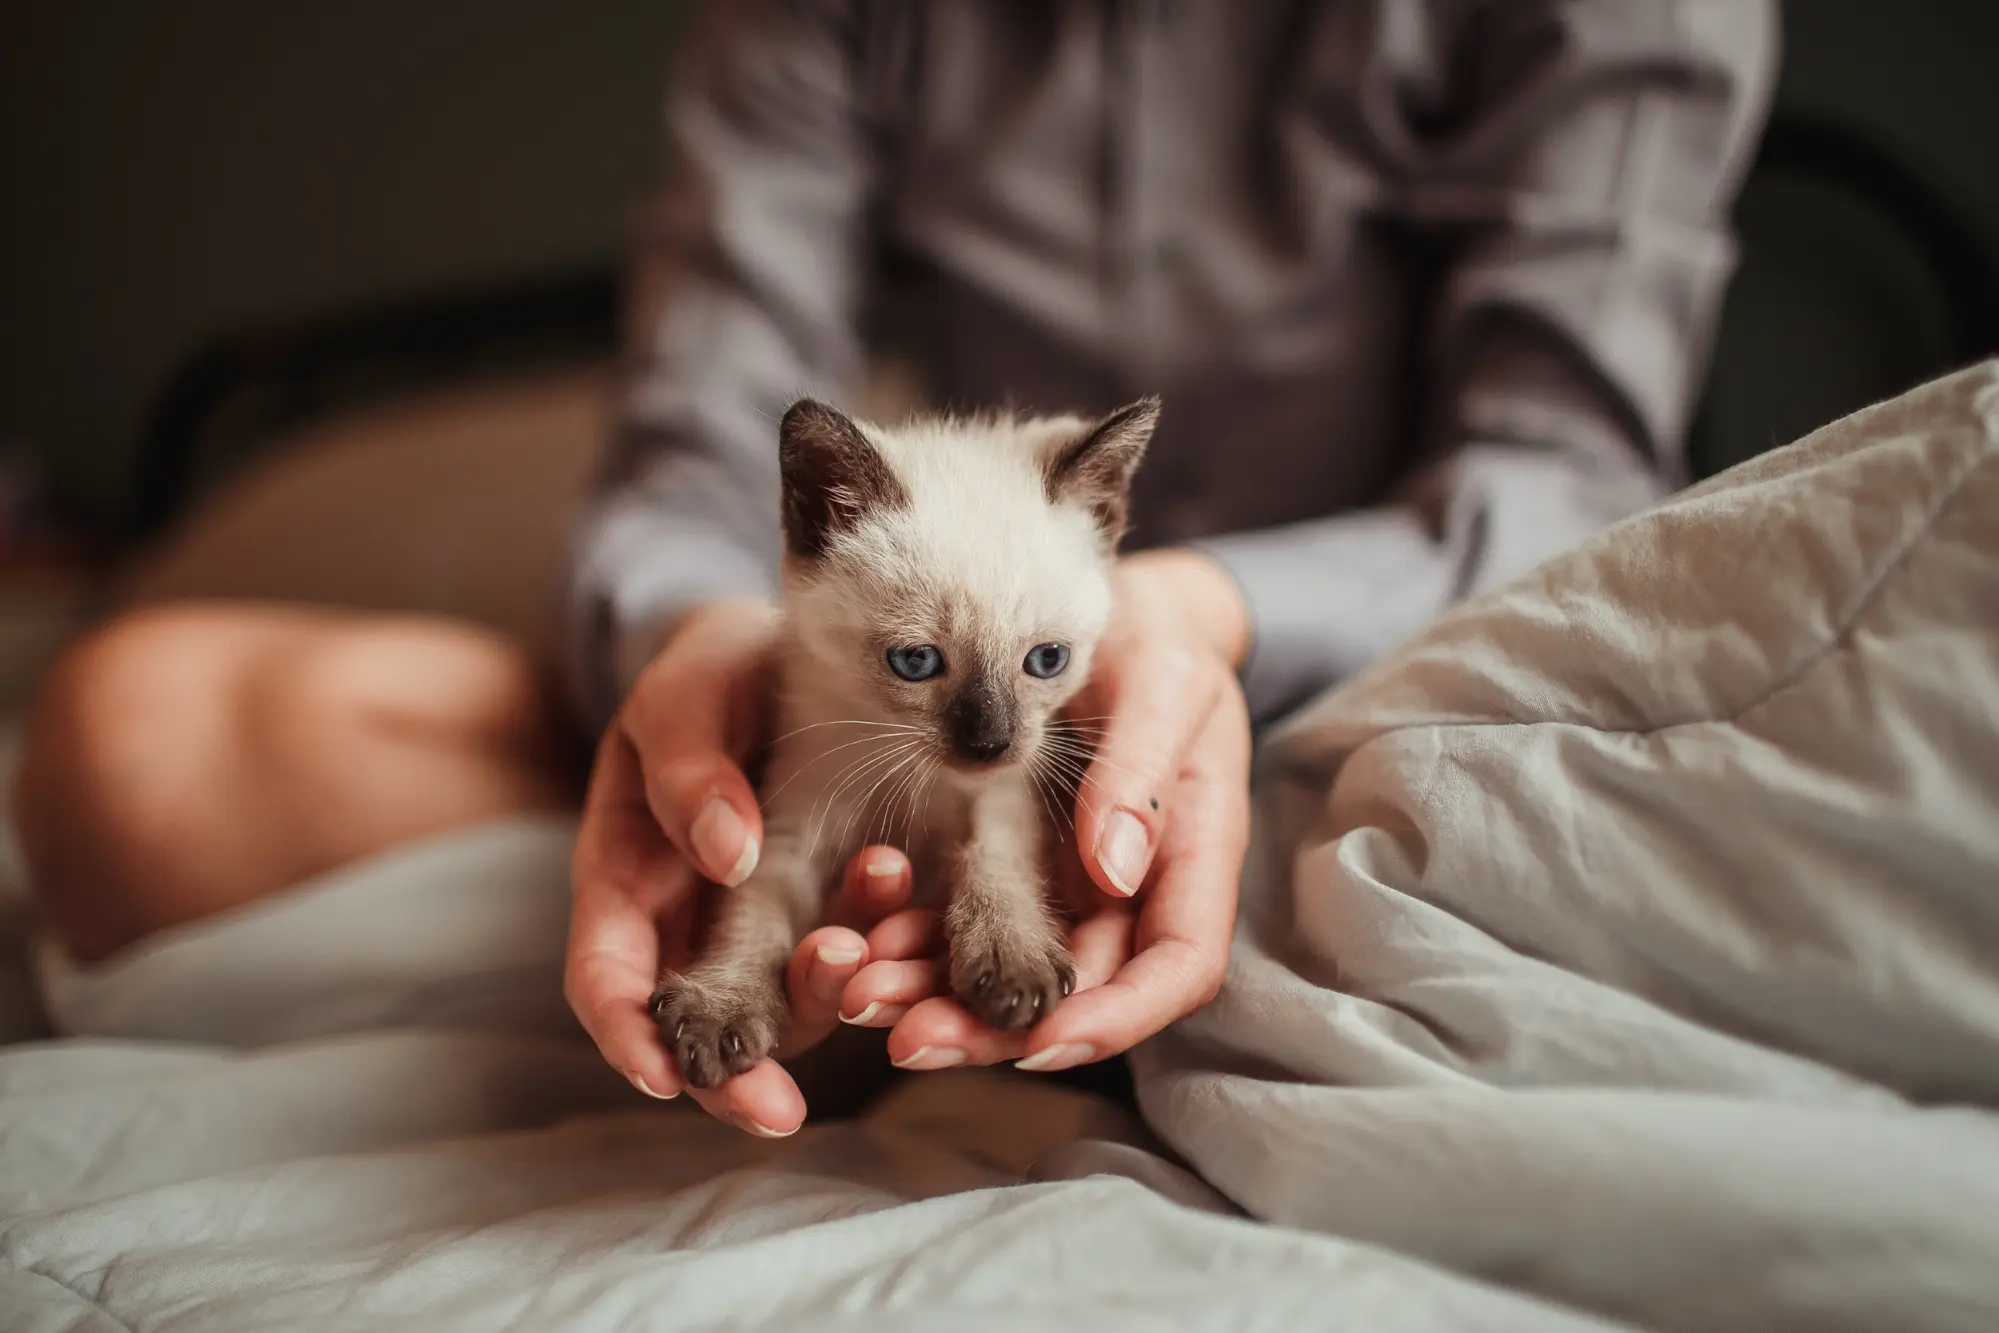 small siamese kitten in hands of person